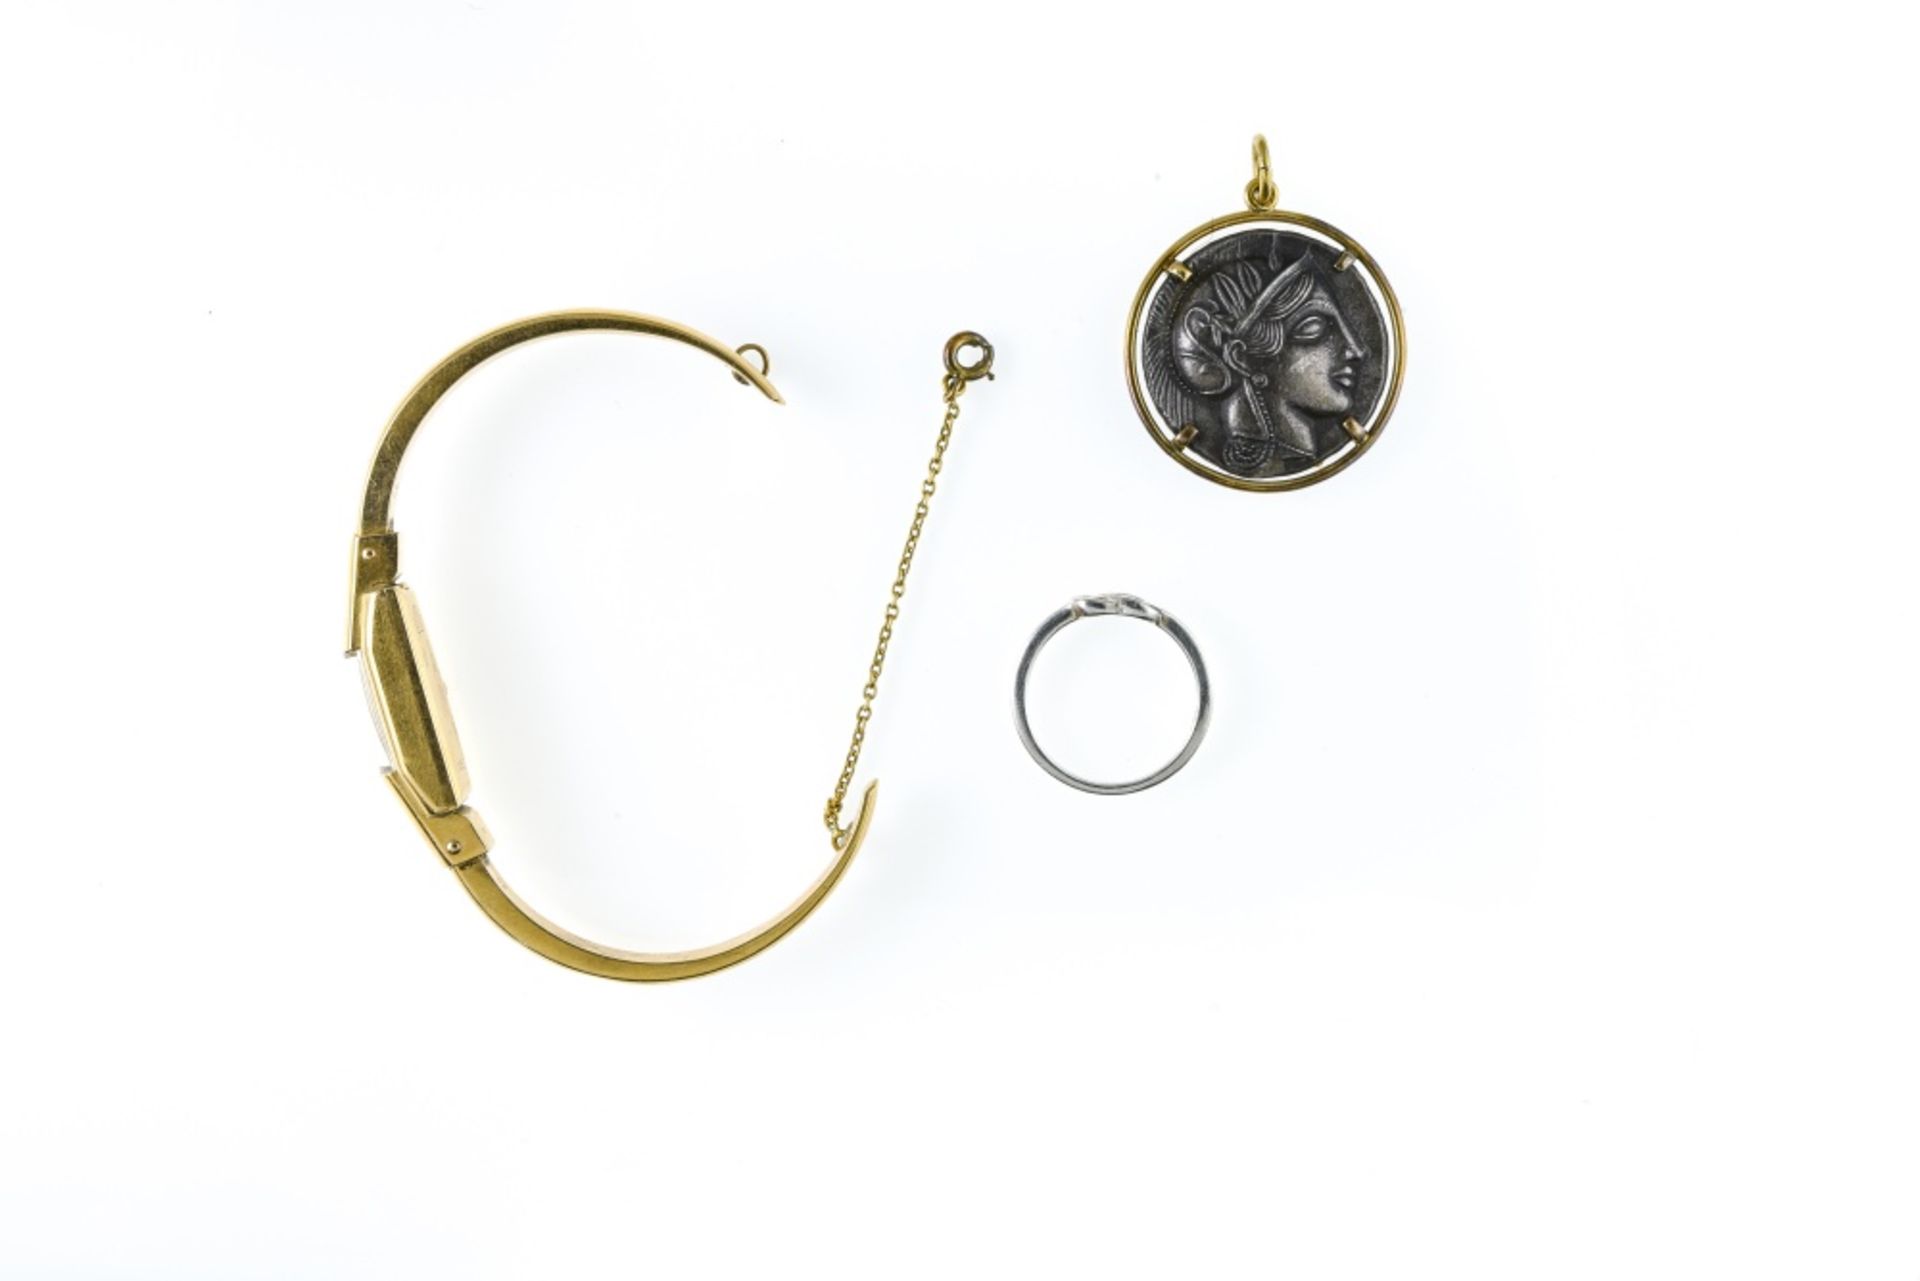 Lot of 3 pieces of jewellery Composed of an 18 kt yellow gold lady's Pontiac-brand watch (gross